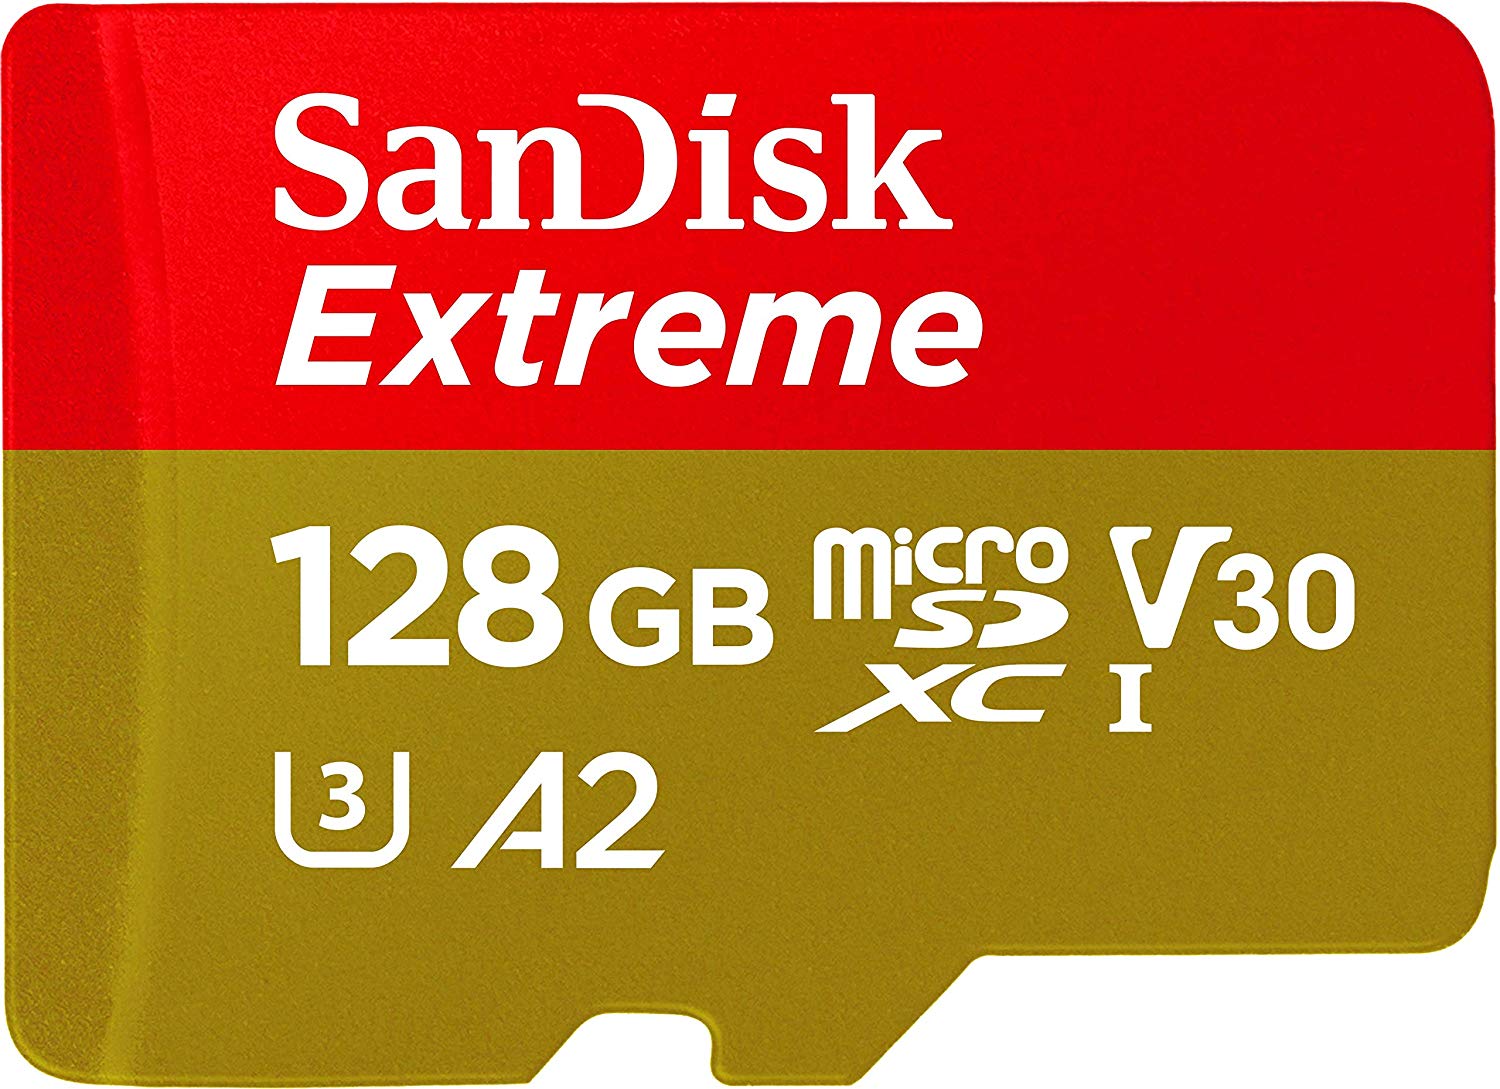 SanDisk Extreme for LG G8 ThinQ